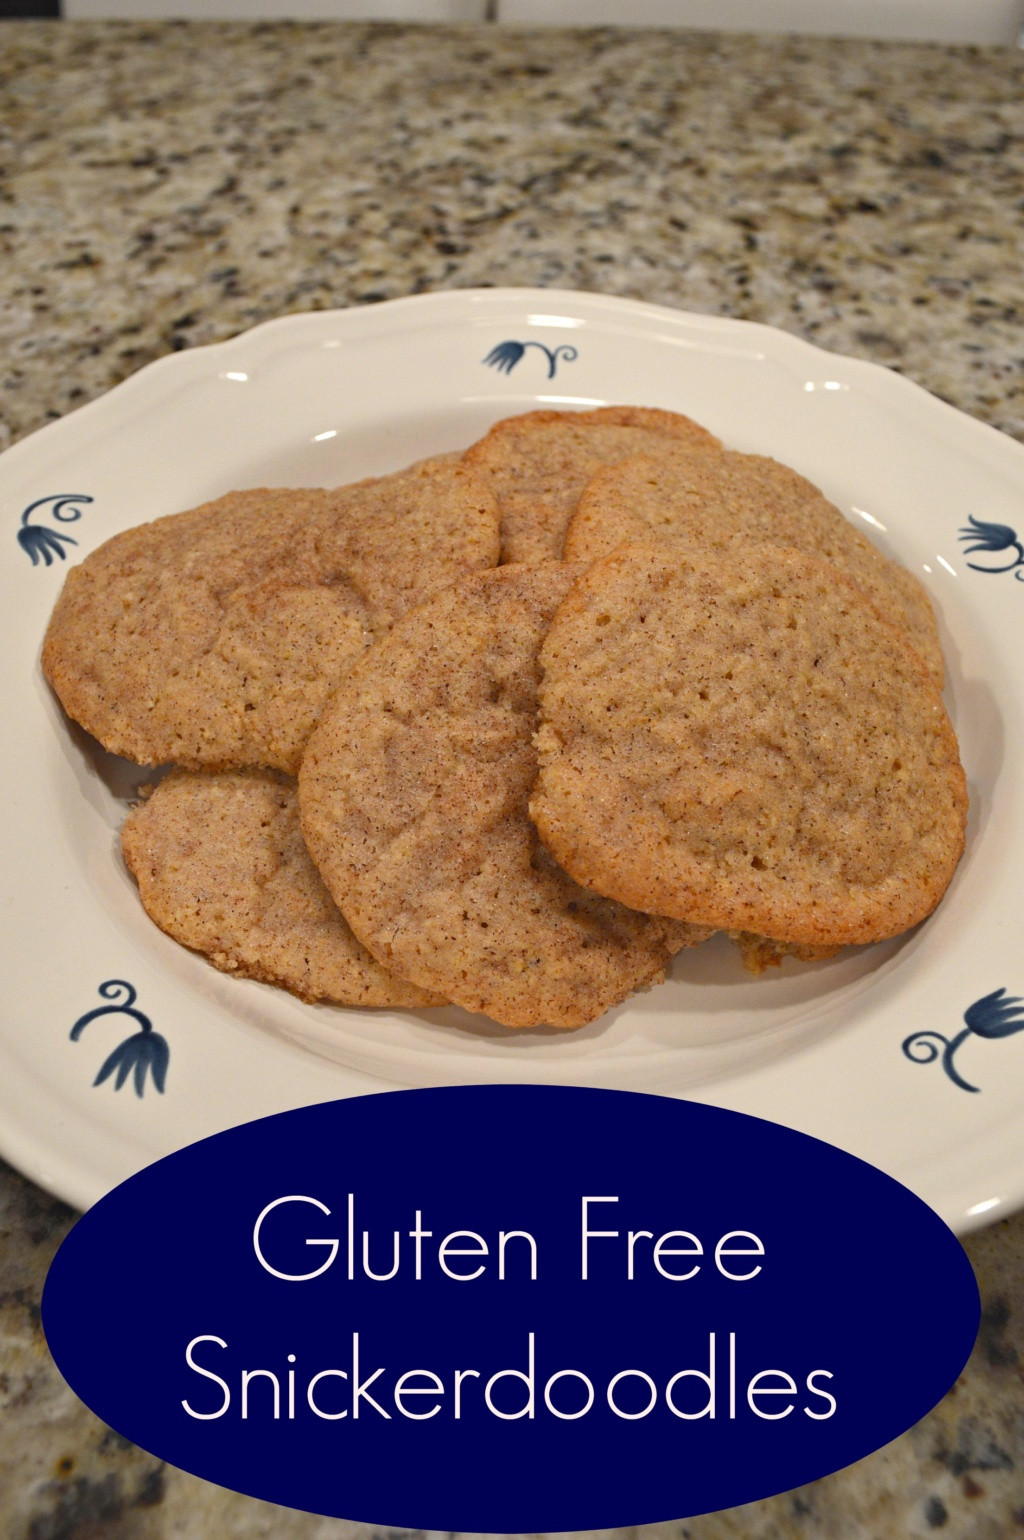 Snickerdoodles Gluten Free
 What I Made This Week Gluten Free Snickerdoodles